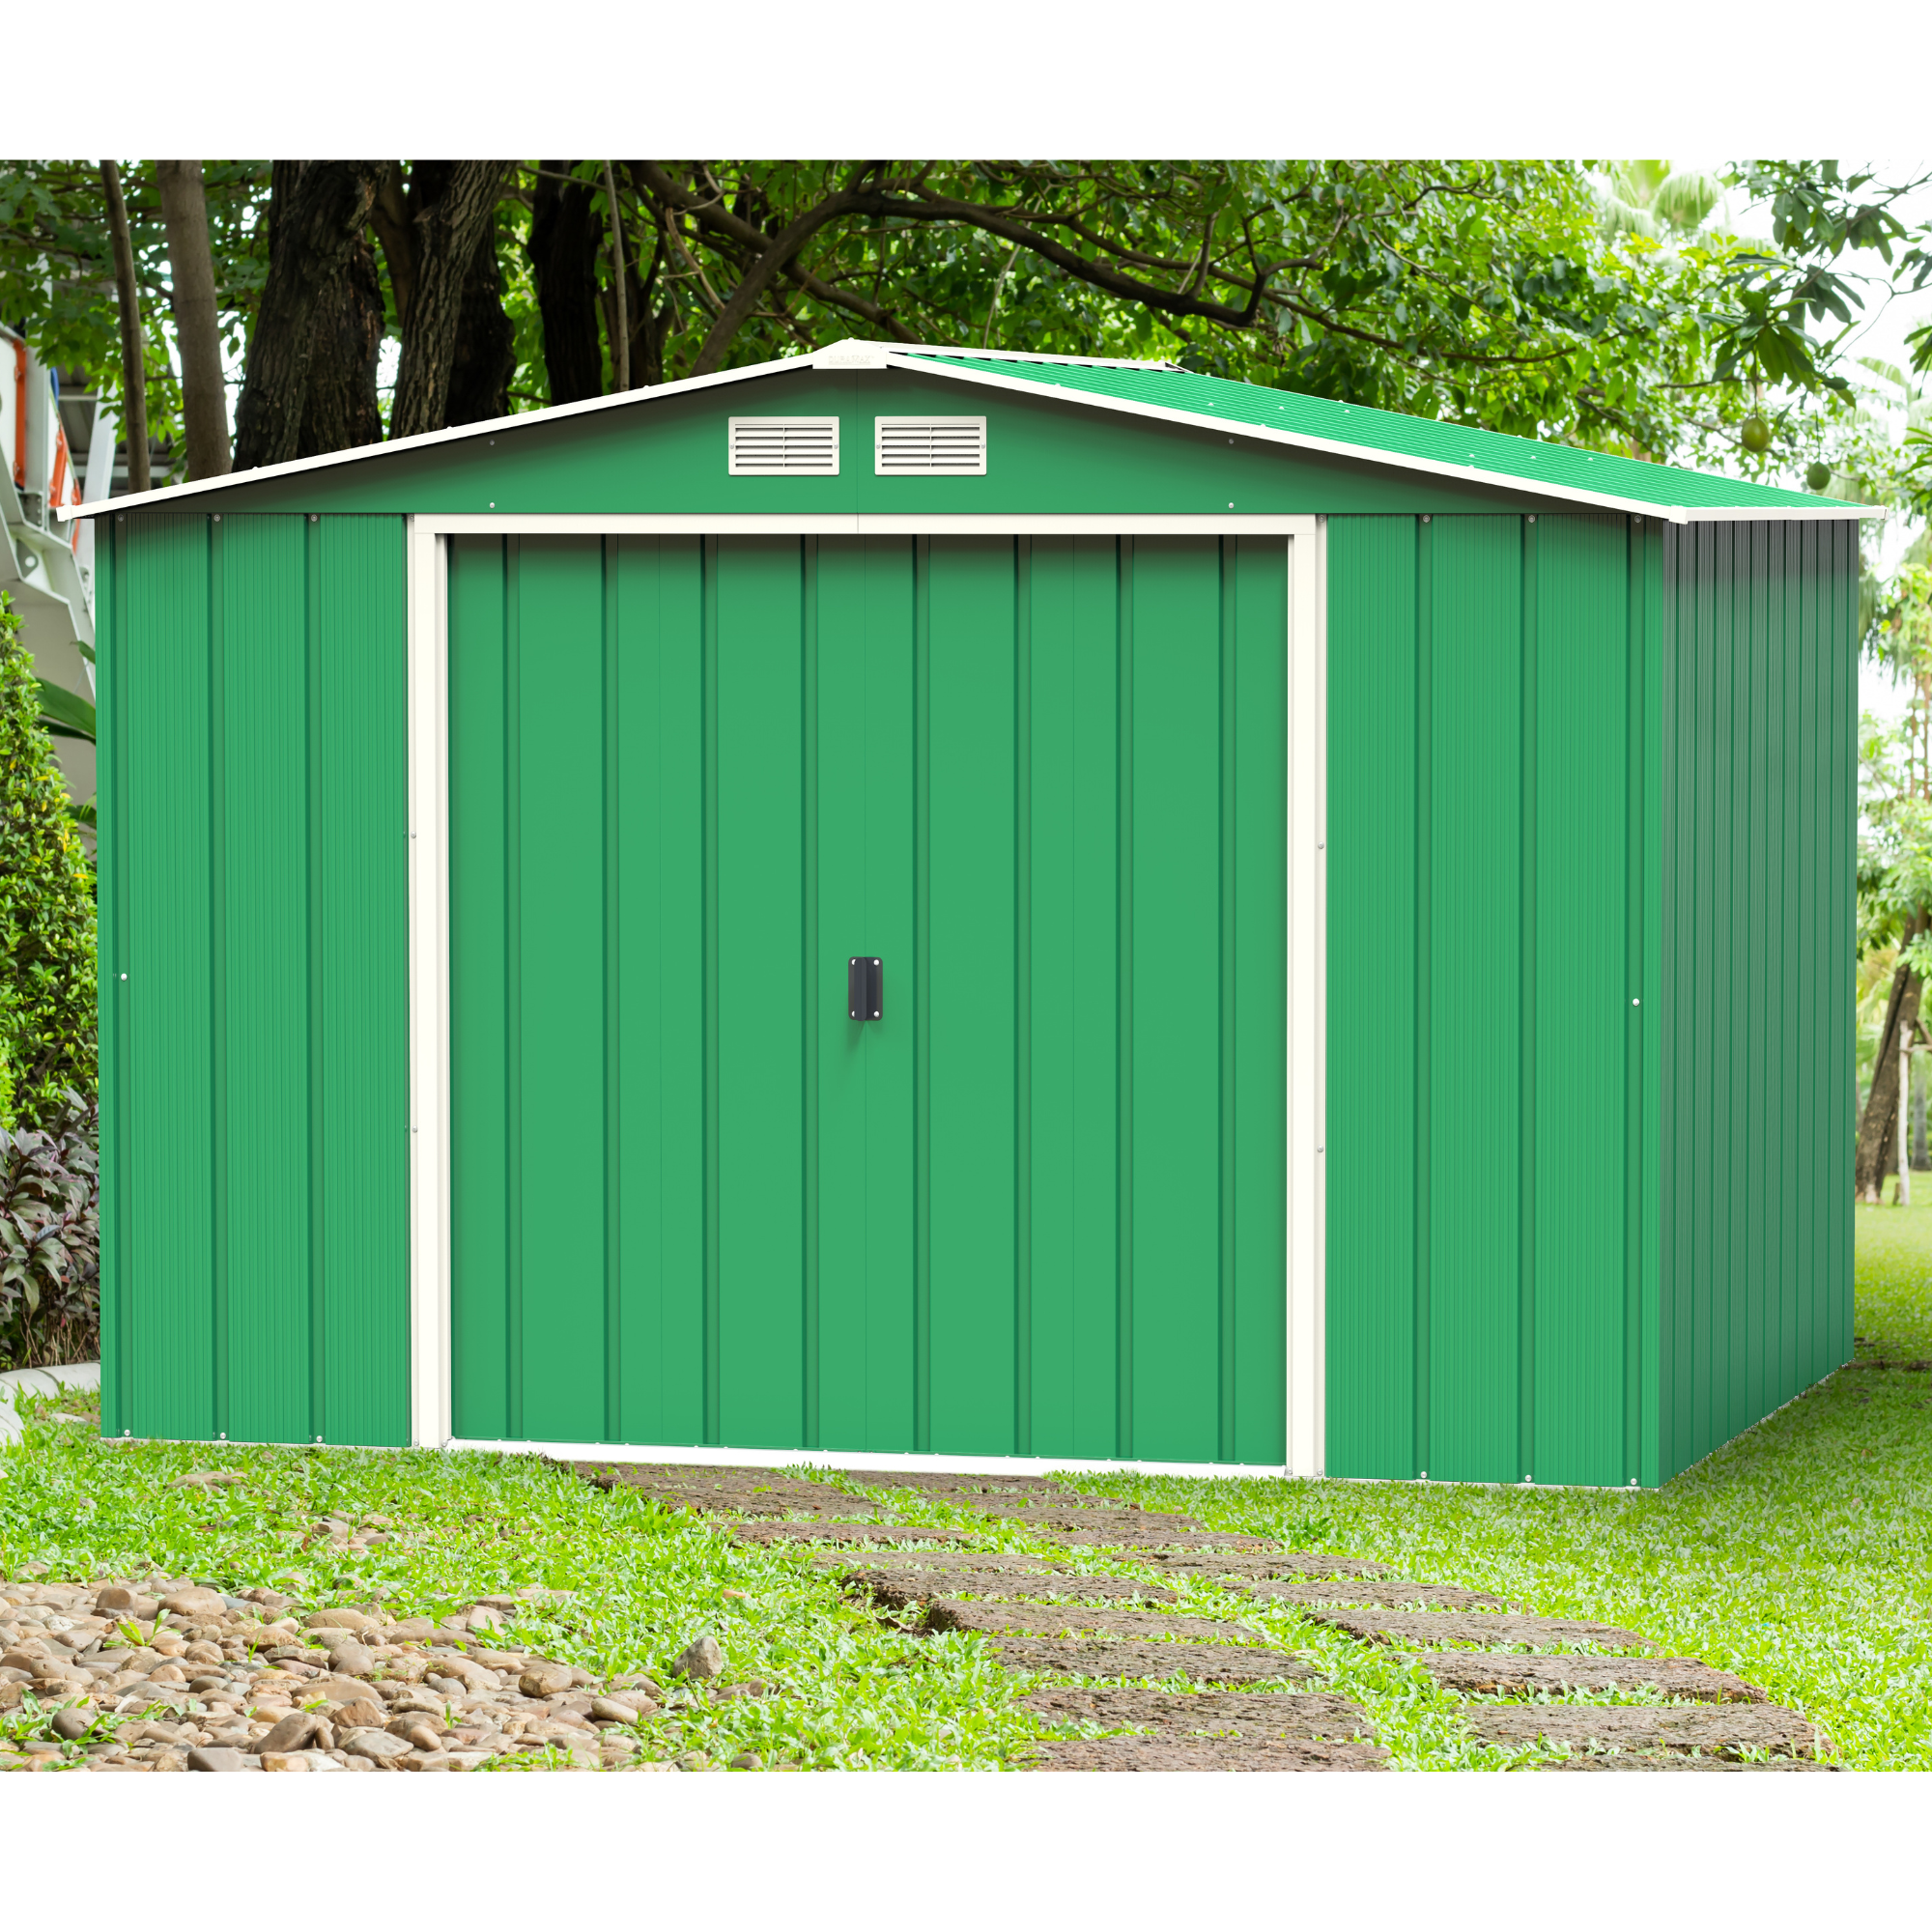 Image of BillyOh Partner Eco Apex Roof Metal Shed - 10x8 Apex Eco